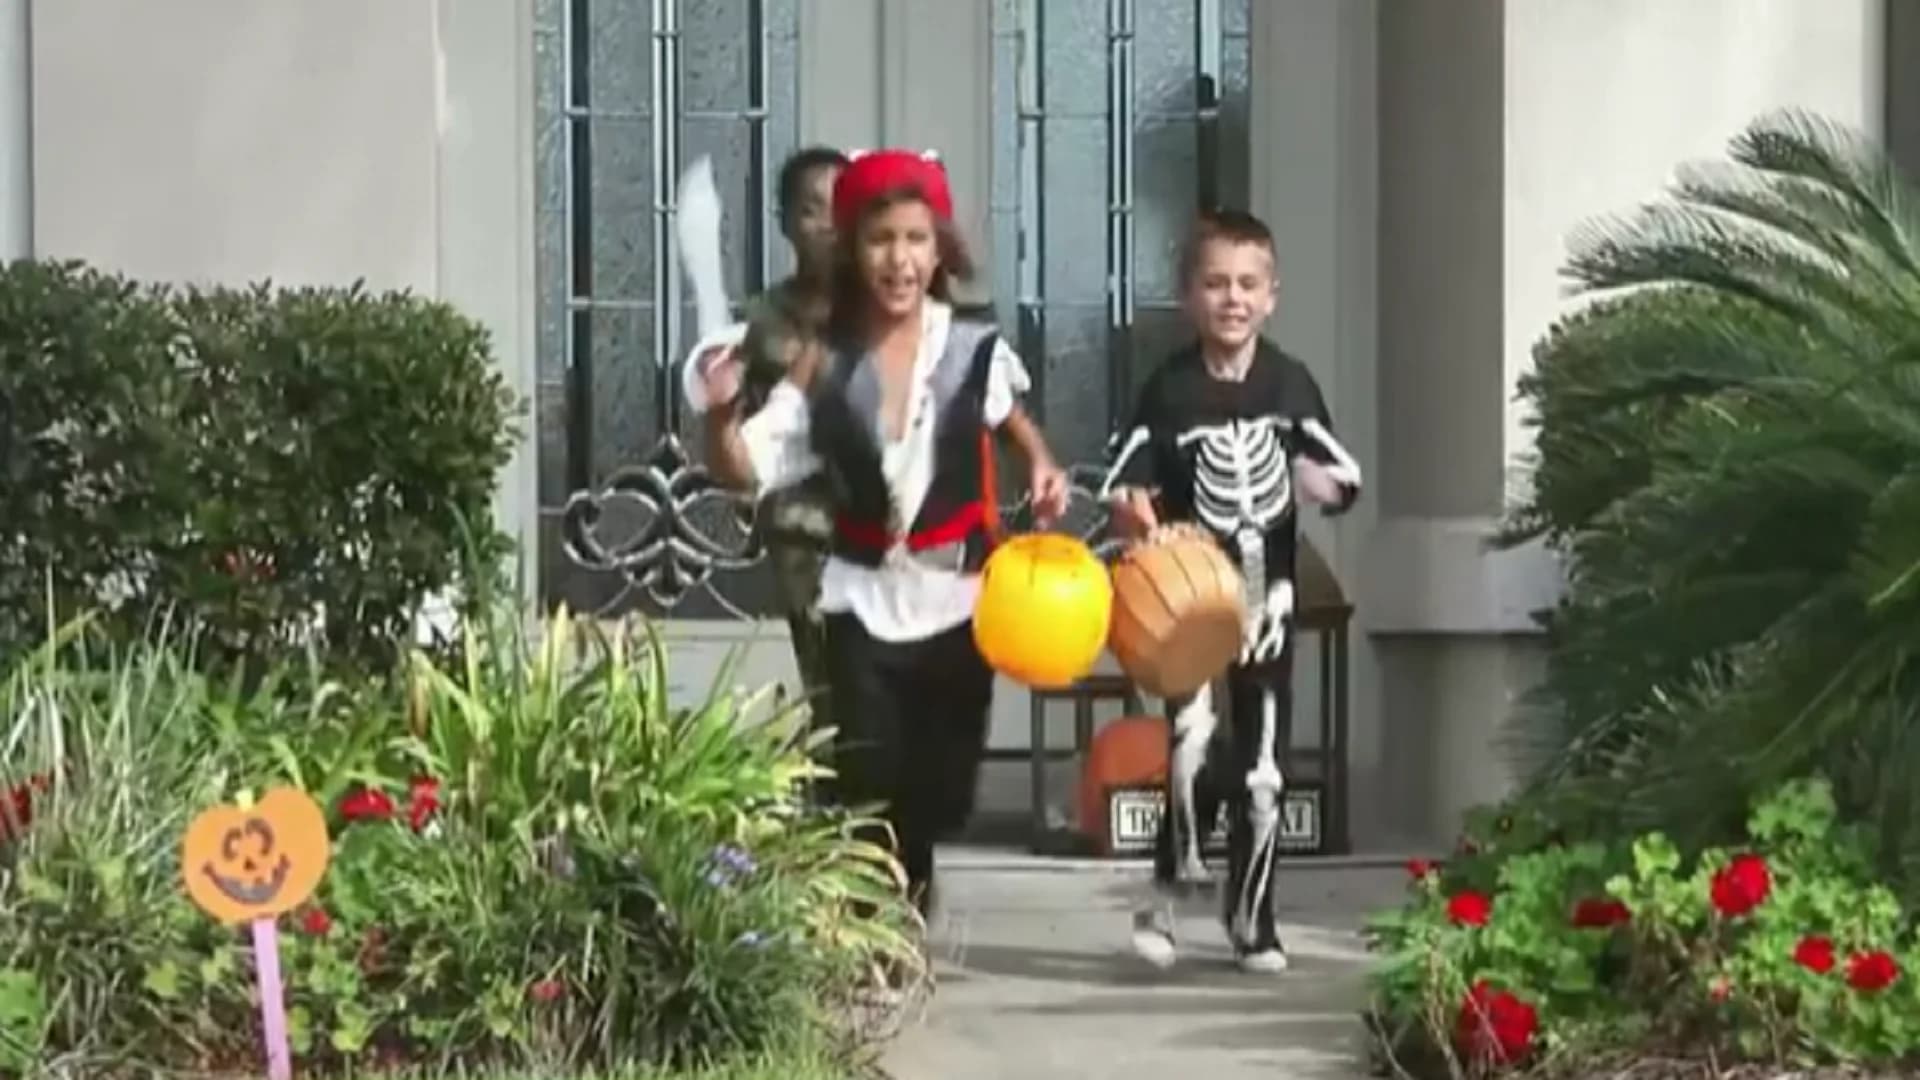 Some New Jersey towns plan special times, days for Halloween trick-or-treating